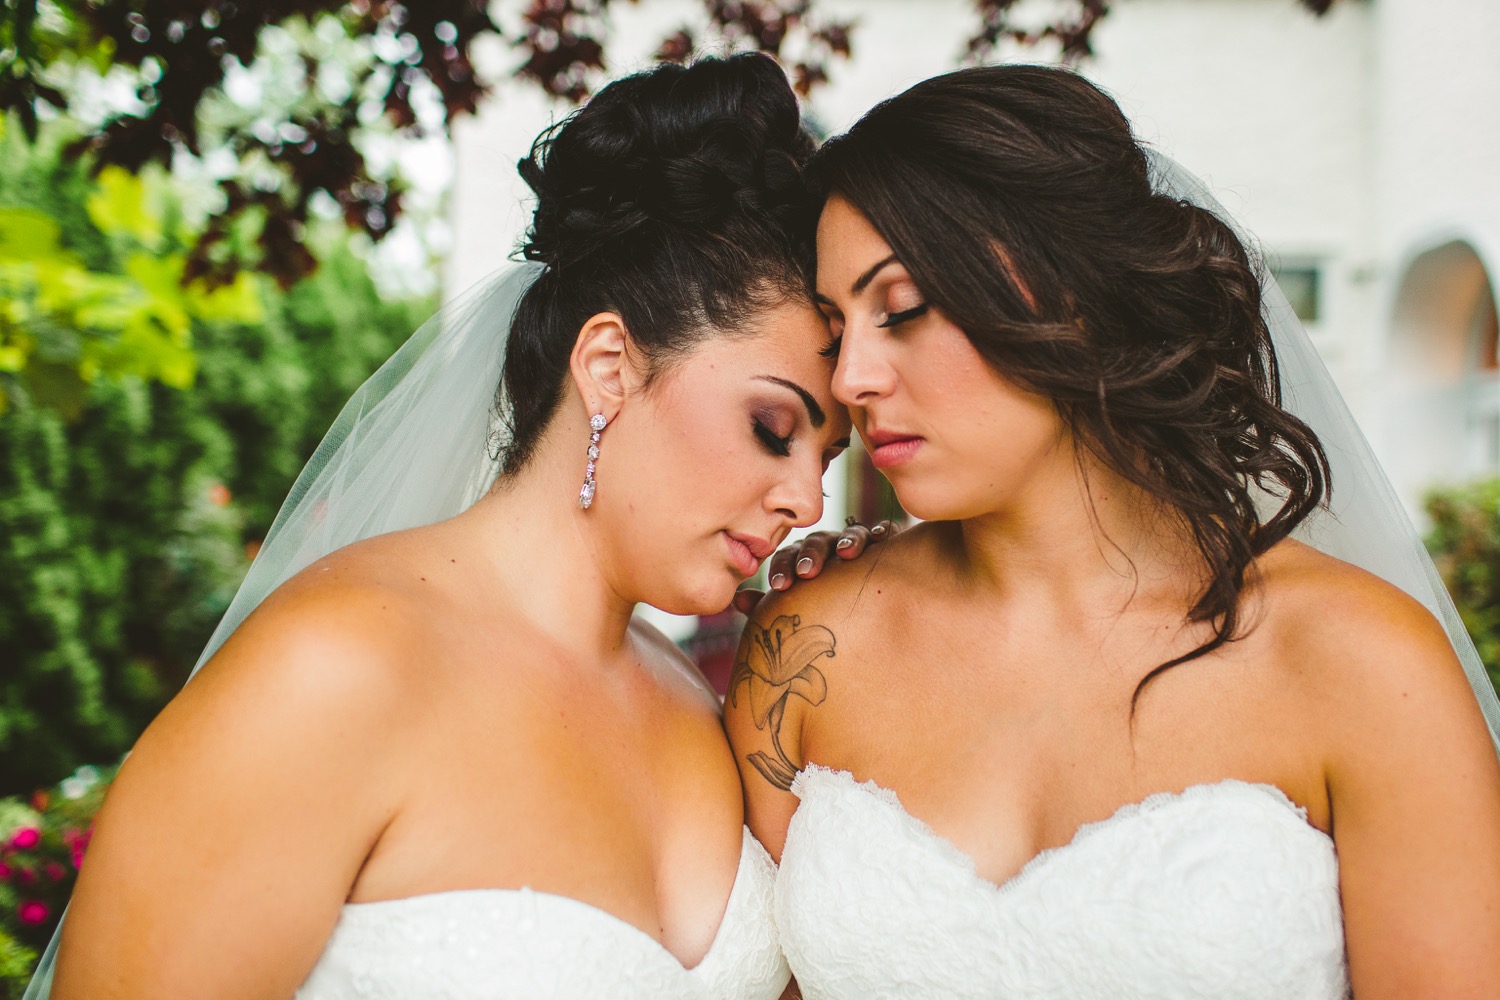 93,000+ Lesbian Wedding Pictures